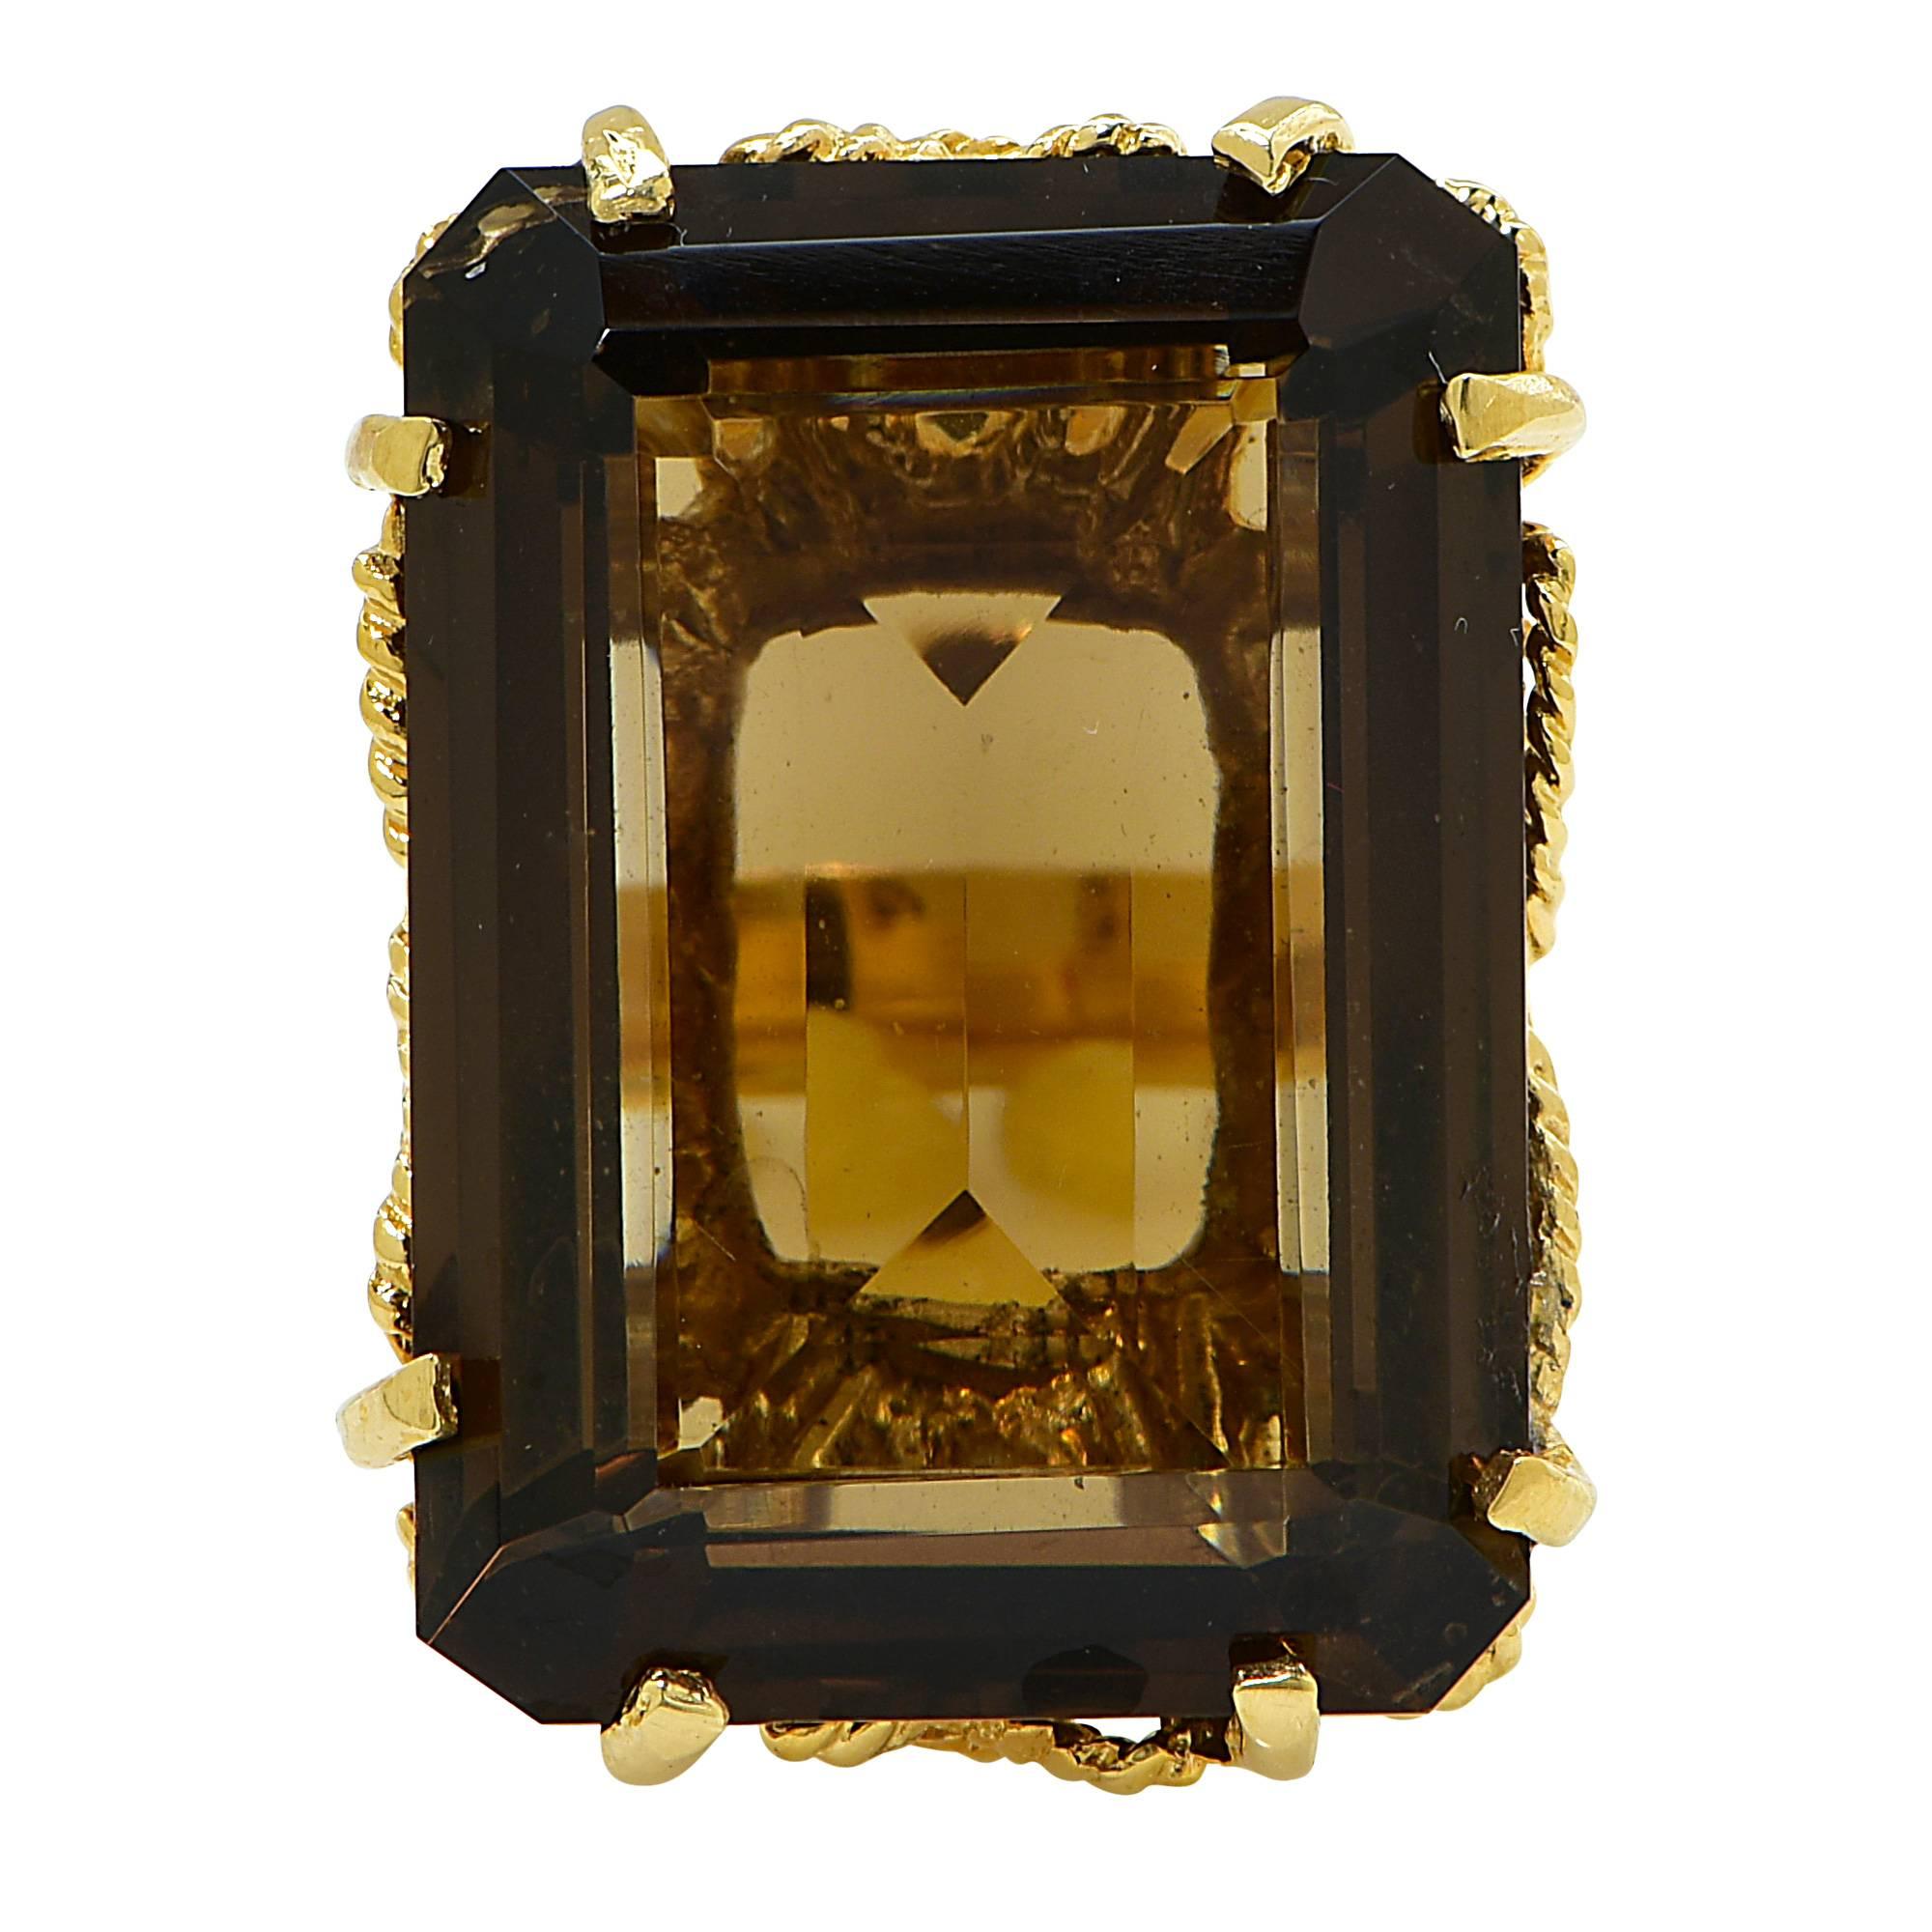 14k yellow gold vintage ring featuring an emerald cut smoky quartz weighing approximately 30cts.

The ring is a size 7 and can be sized up or down.
It is stamped and tested as 14k gold.
The metal weight is 14.92 grams.

This smoky quartz ring is